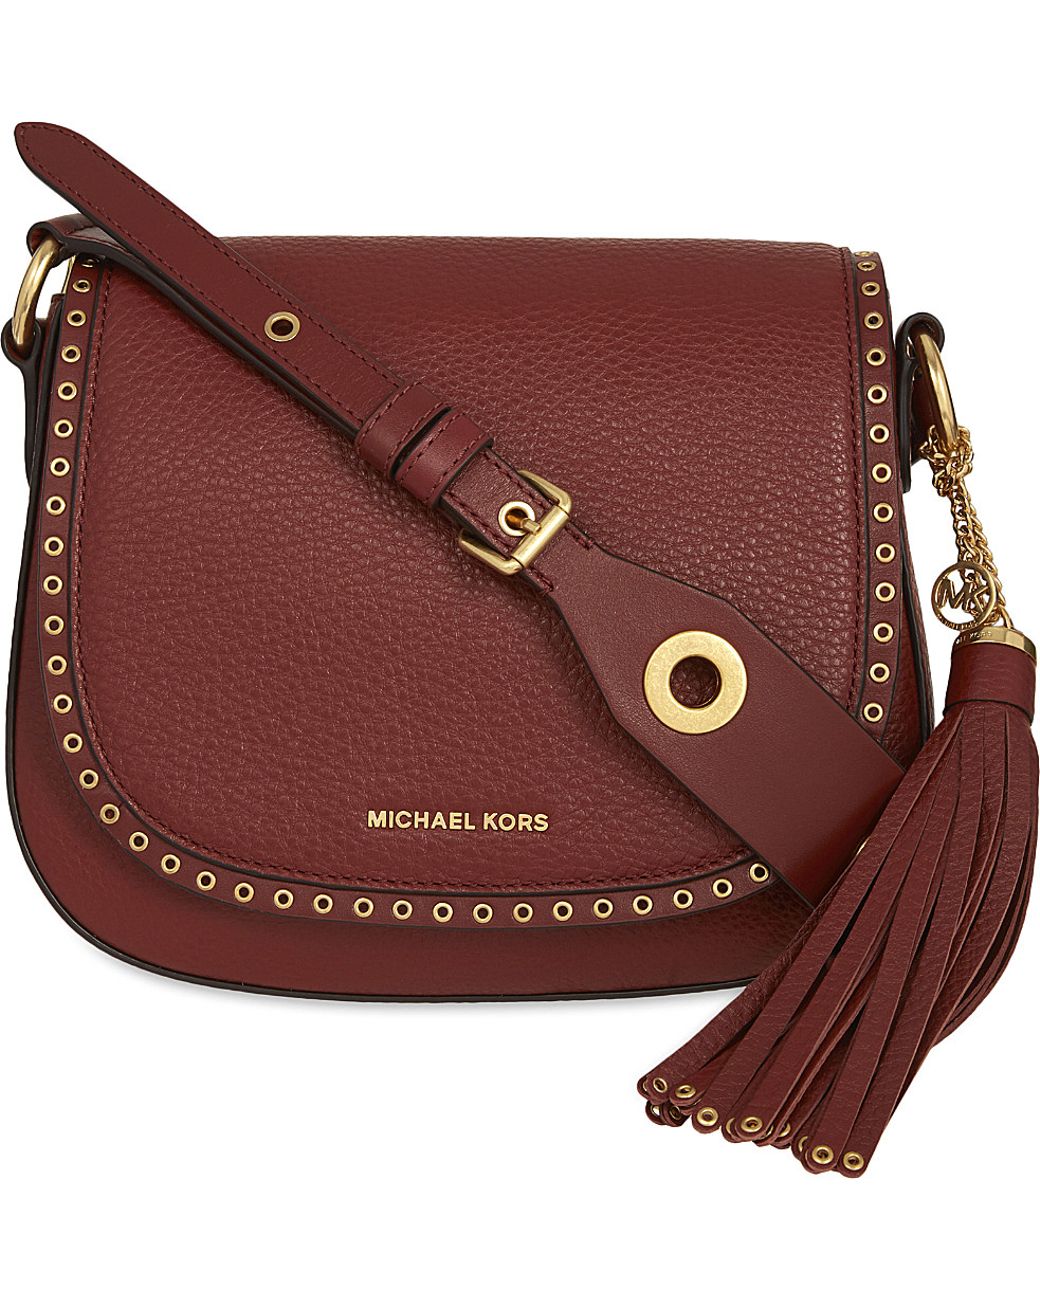 Michael Kors - Authenticated Brooklyn Handbag - Leather Brown Plain For Woman, Good condition